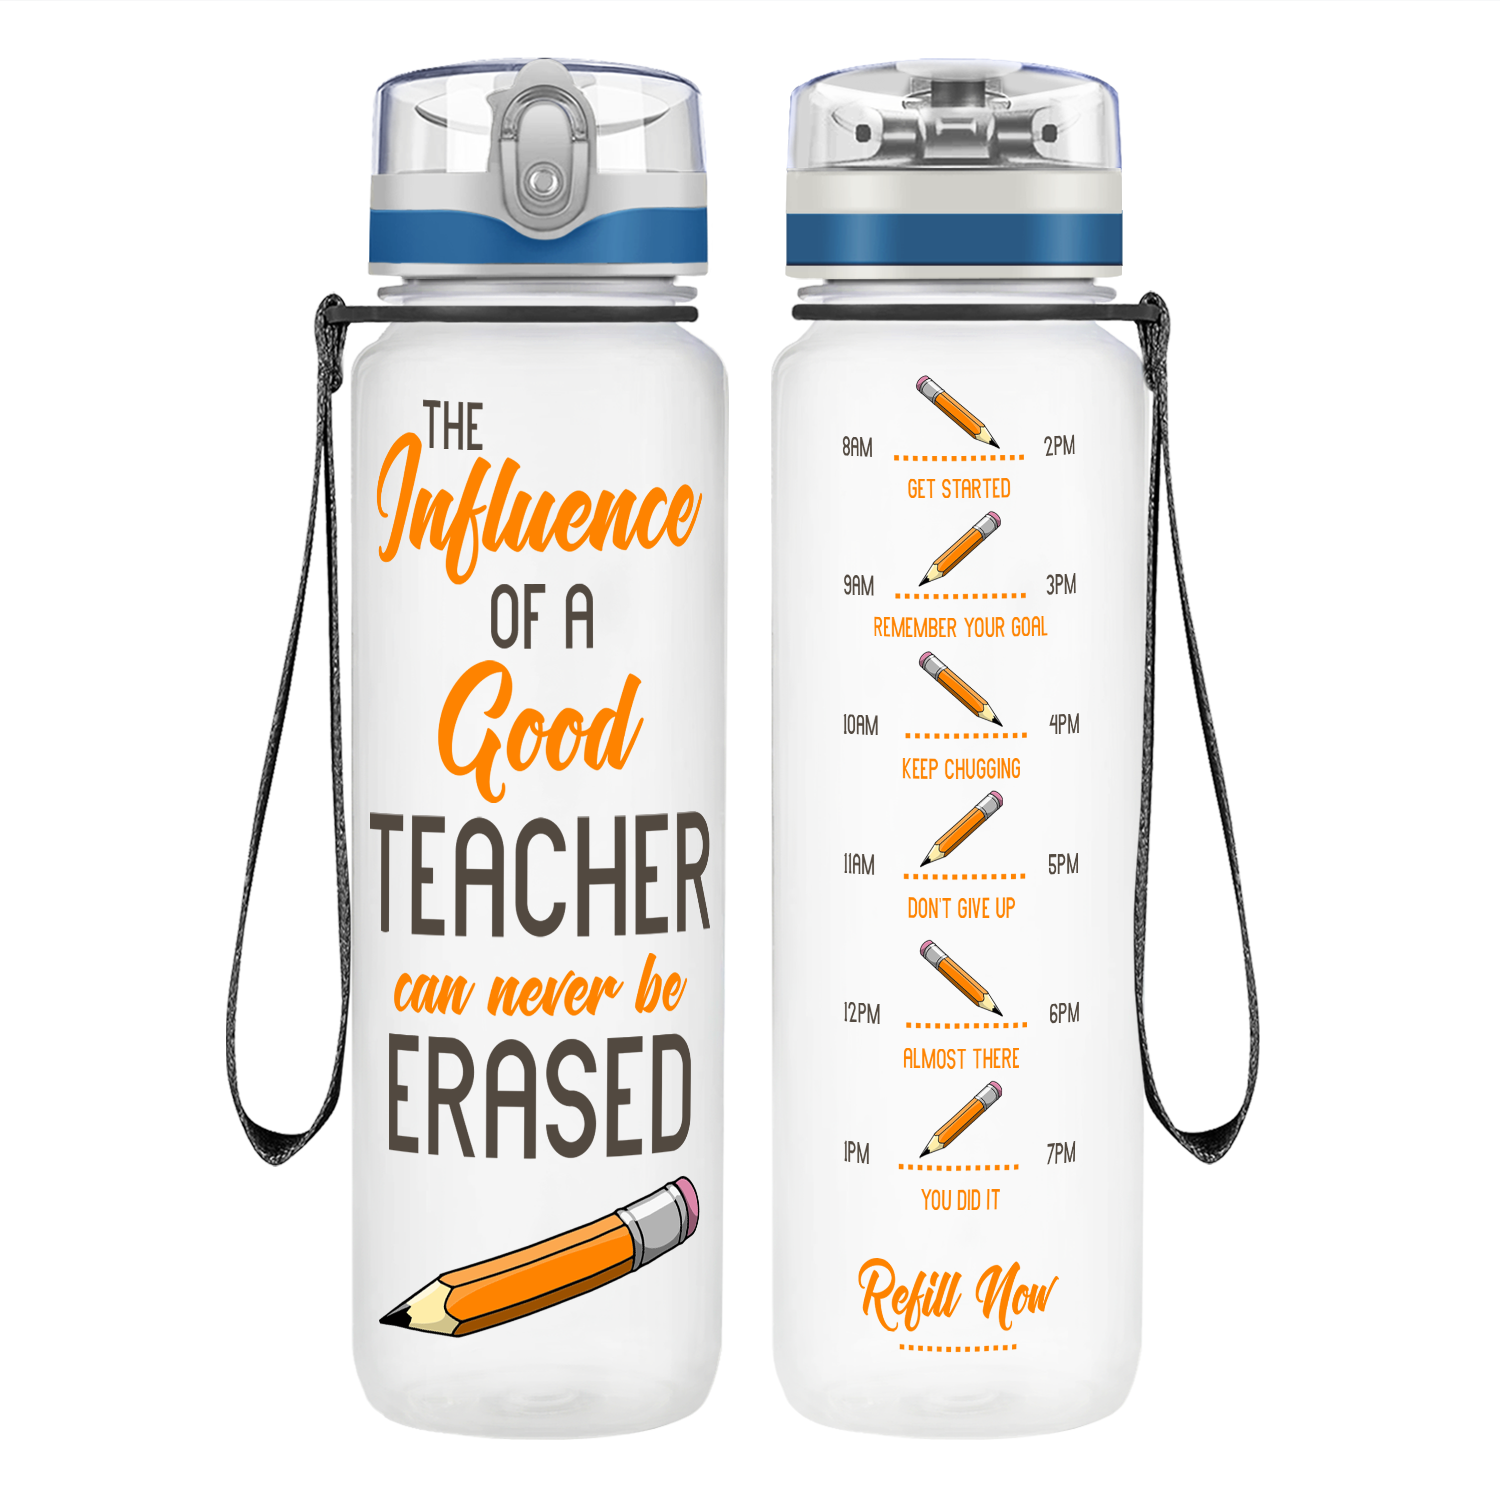 Nurses are Angel on 32oz Motivational Tracking Water Bottle - Cuptify